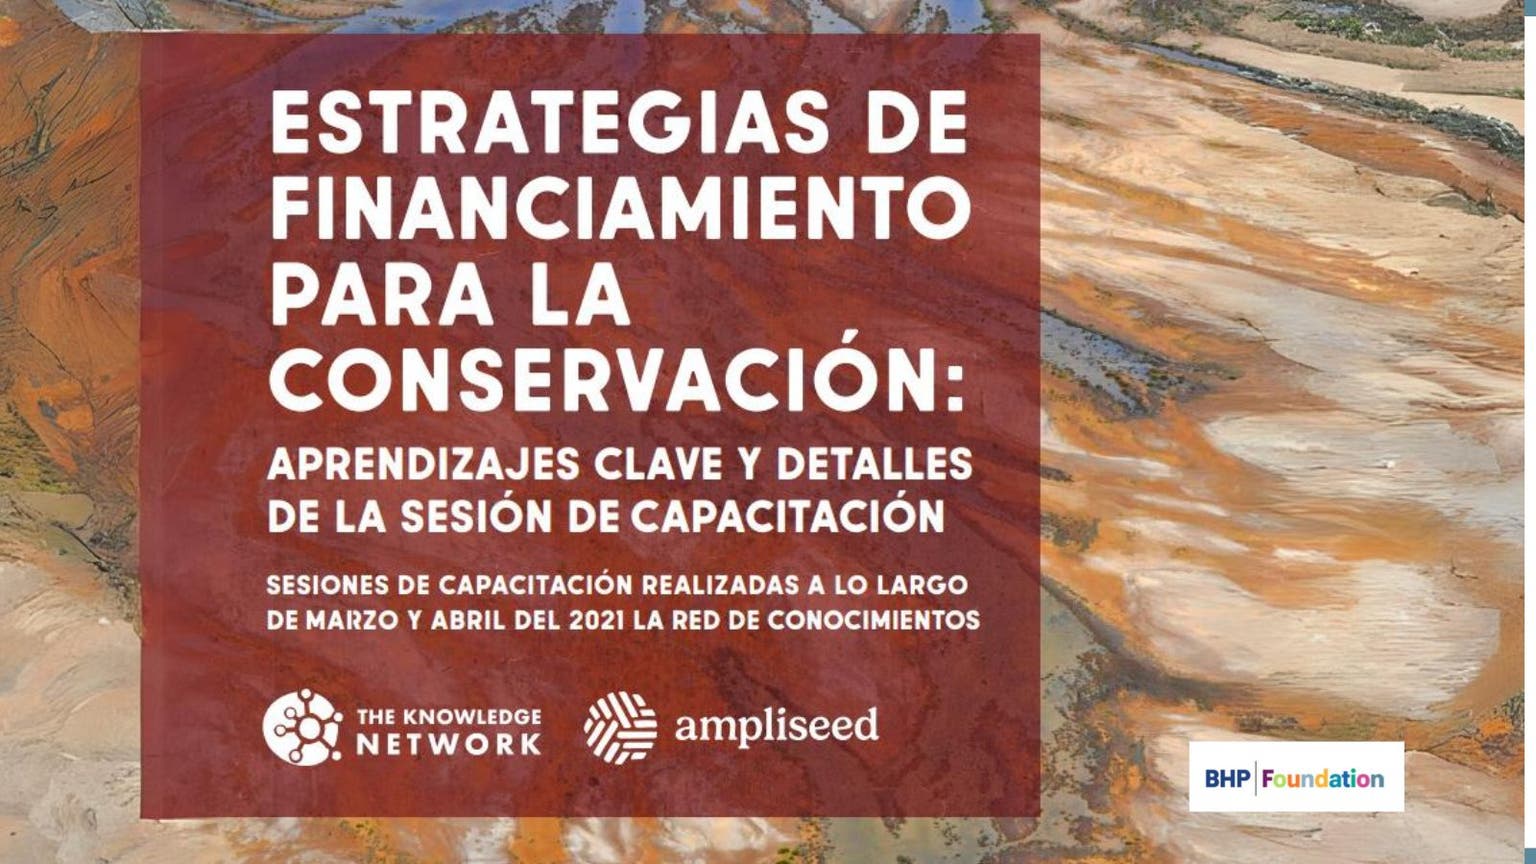 BHP_Foundation_Conservation_Financing_Strategies_Key_Lessons_and_Case_Studies_report_Spanish.jpg